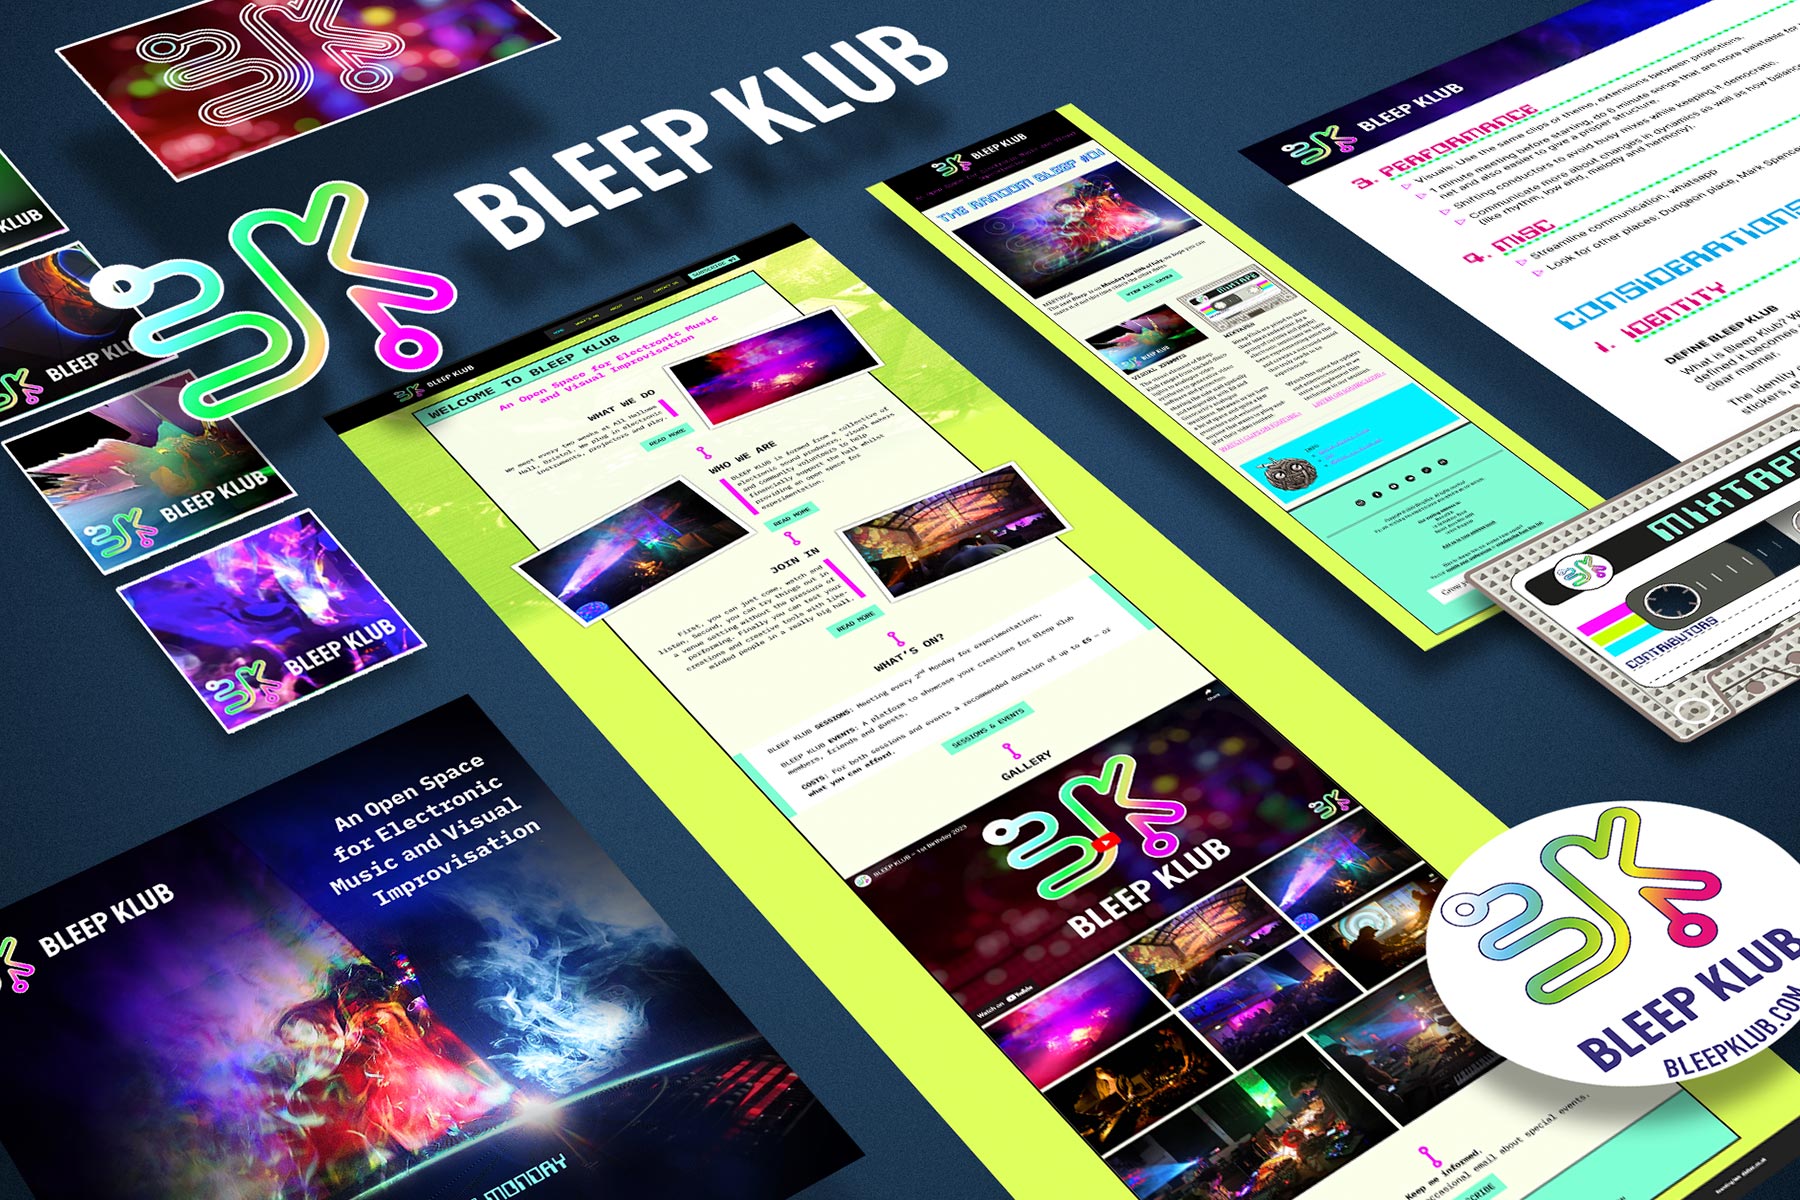 didier.co.uk - Web design, Graphic design and artwork for the music industry - Case study: Bleep Klub